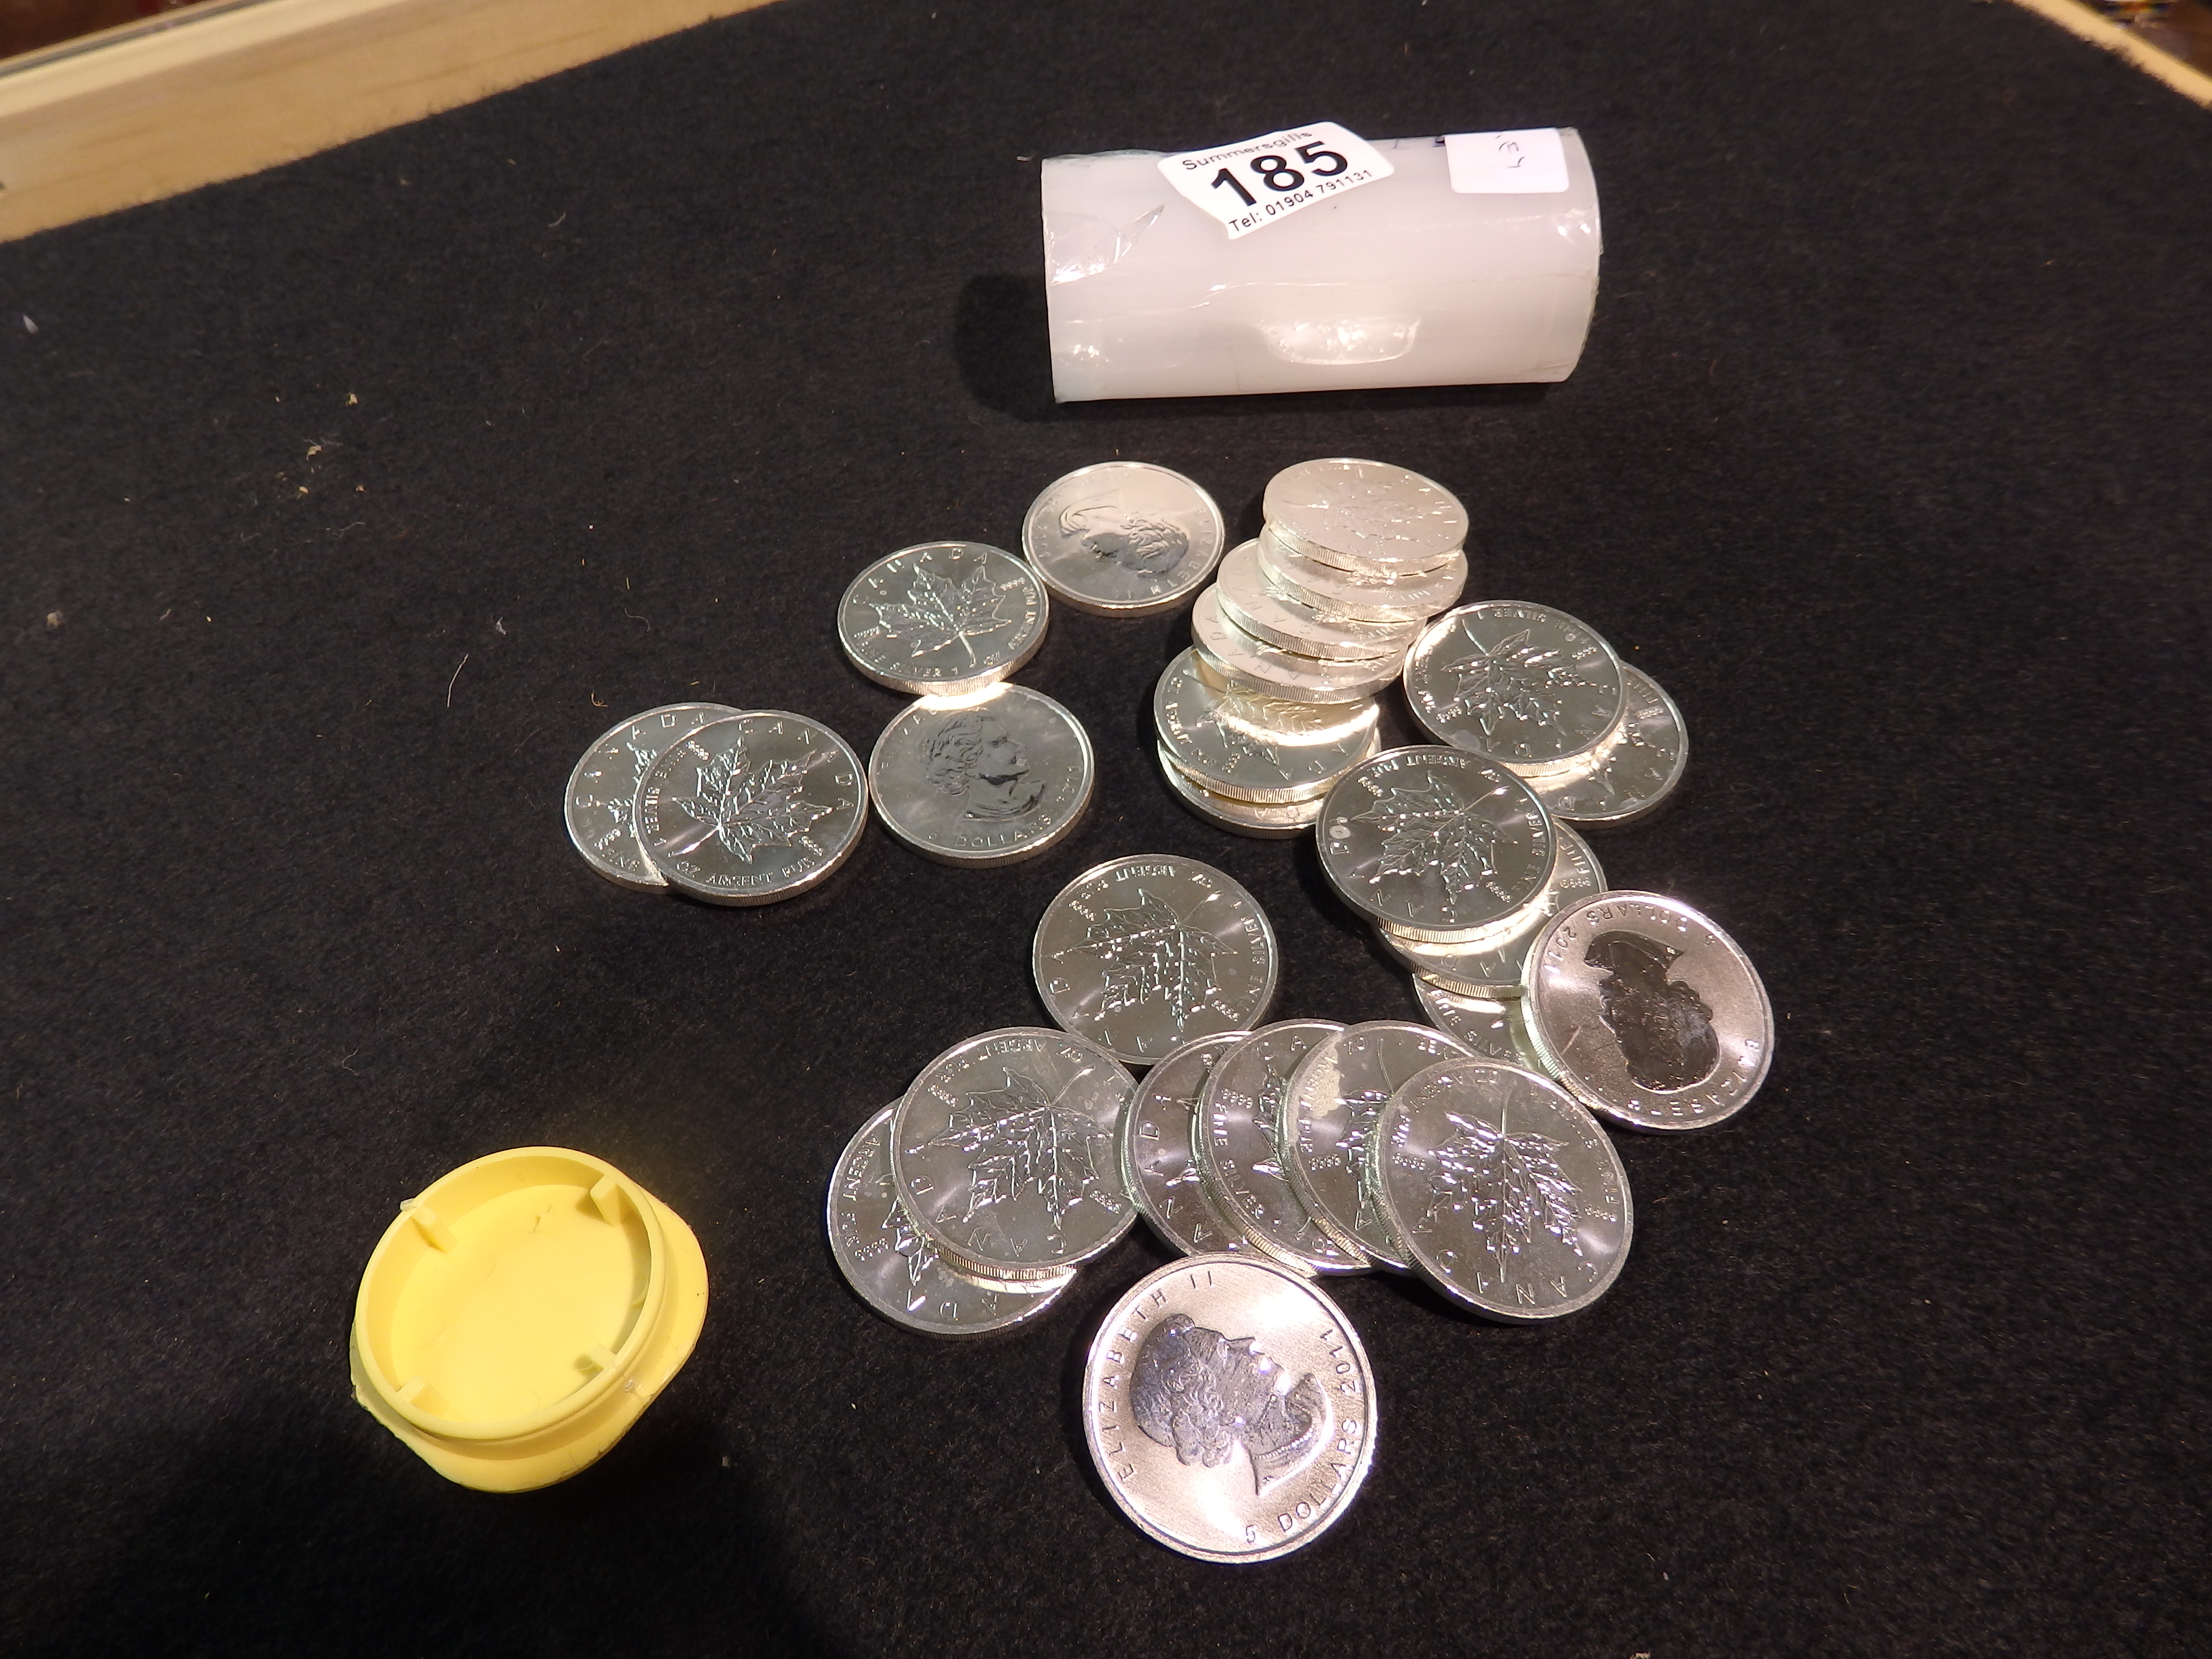 Canadian silver coins